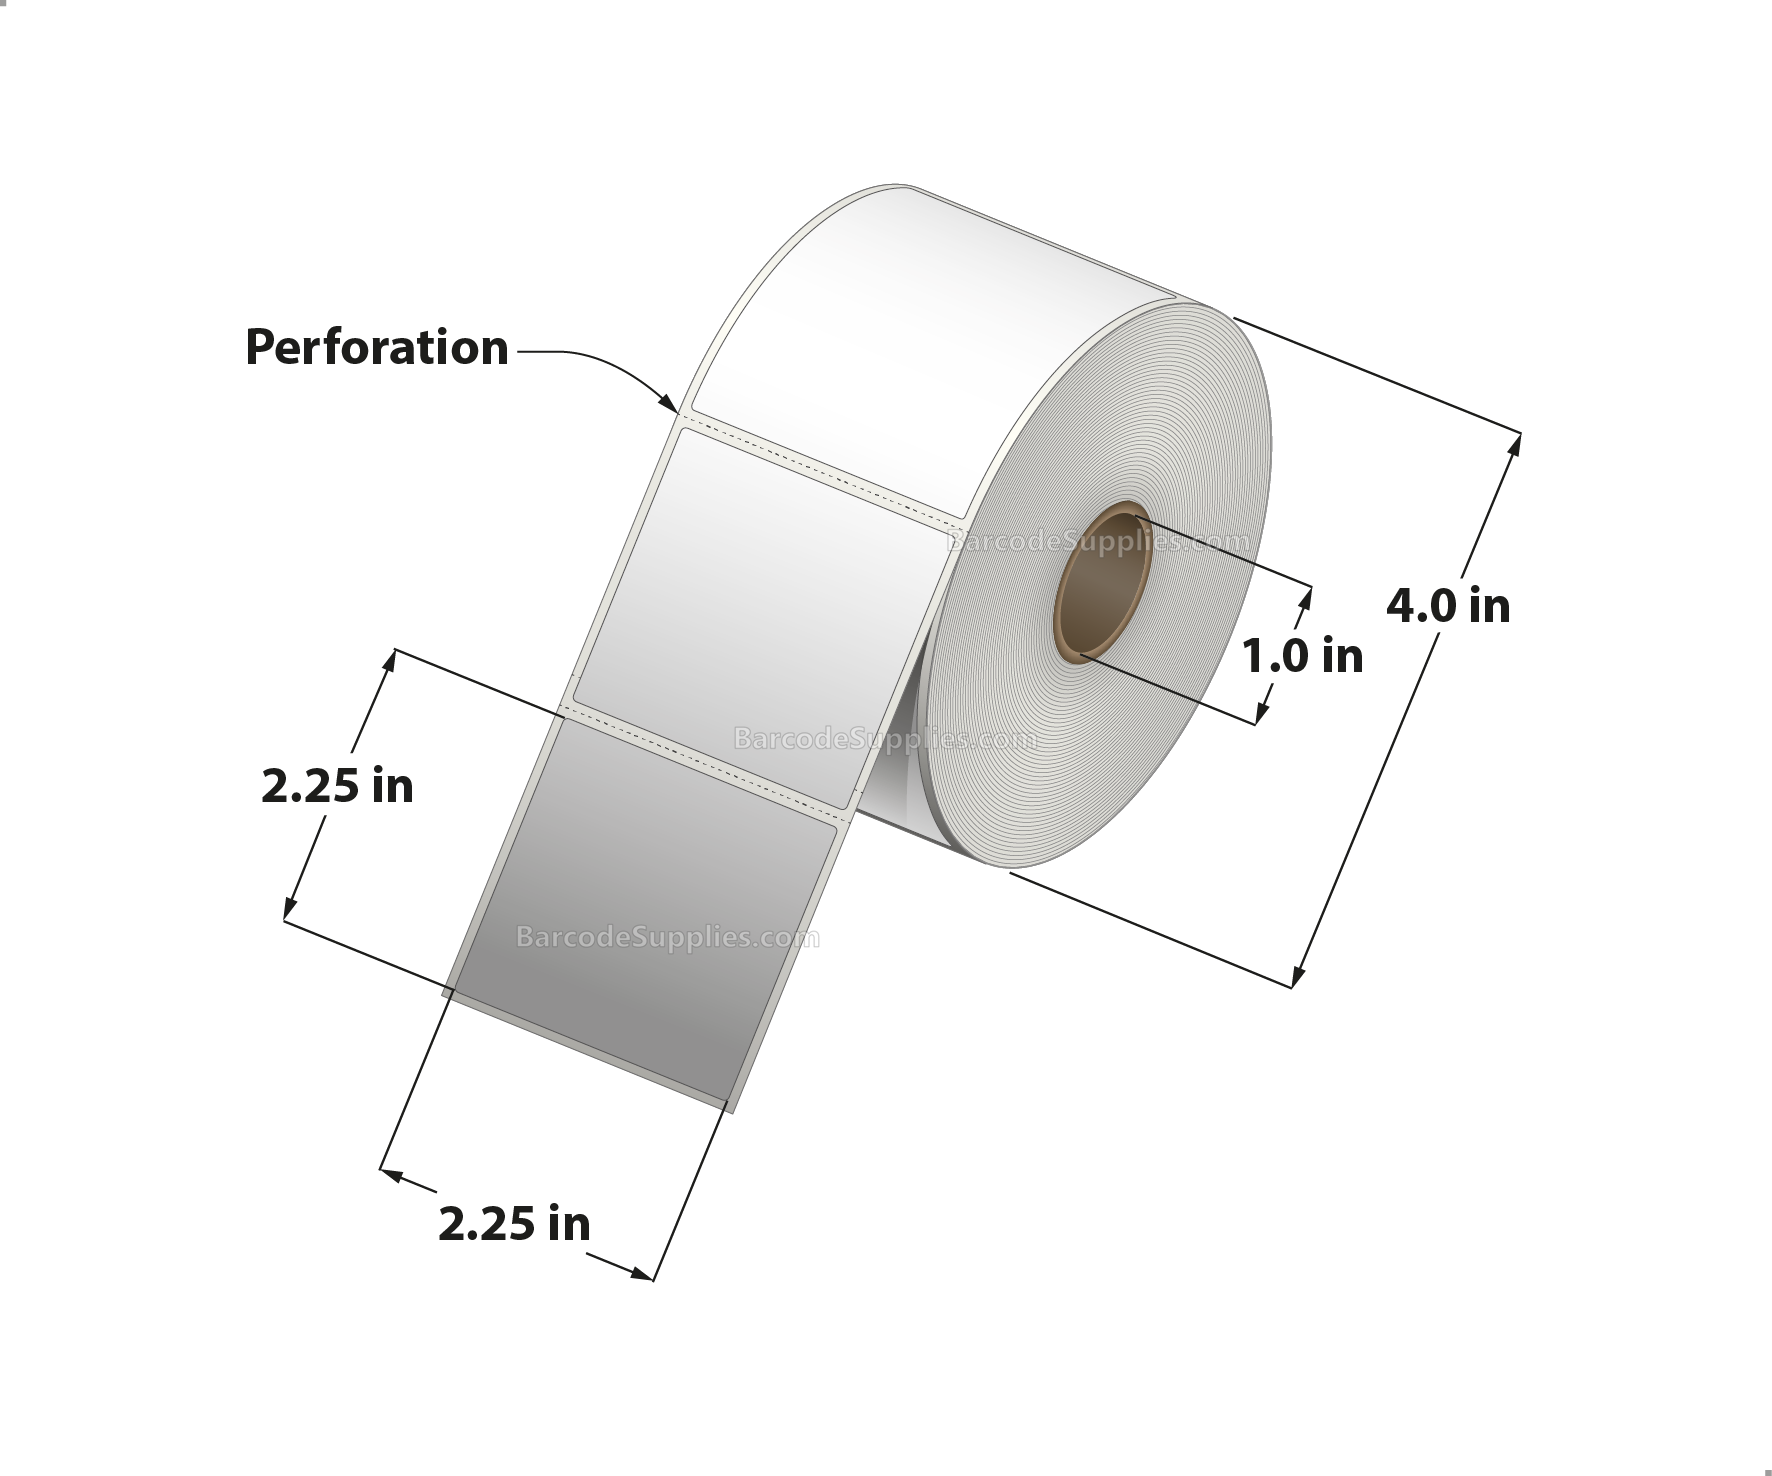 2.25 x 2.25 Thermal Transfer White Labels With Rubber Adhesive - Perforated - 700 Labels Per Roll - Carton Of 12 Rolls - 8400 Labels Total - MPN: RTT4-225225-1P